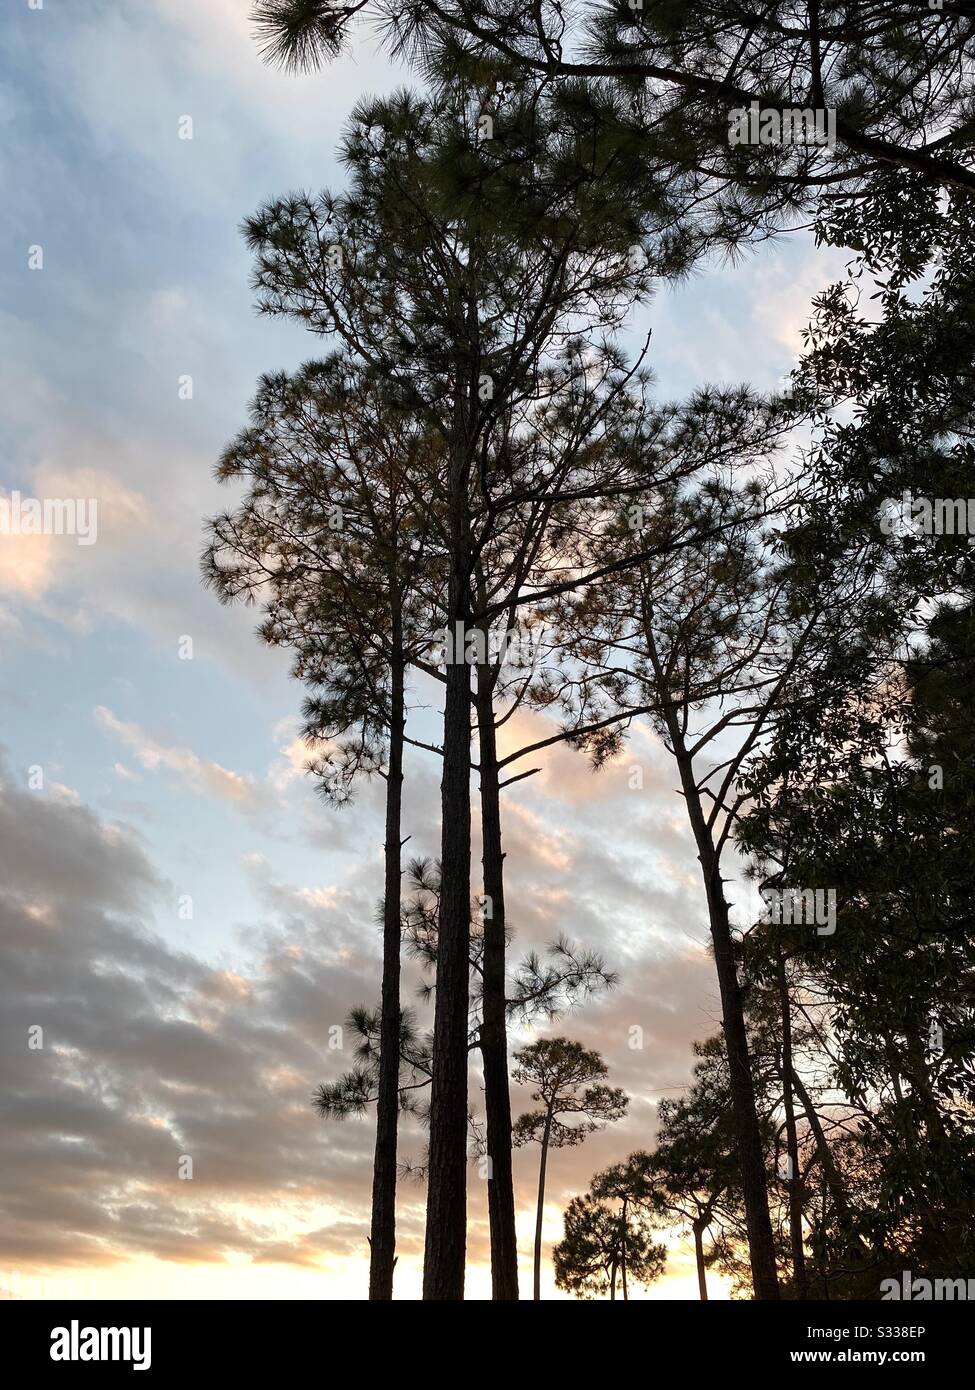 Y’all pine trees with sunset sky background Stock Photo